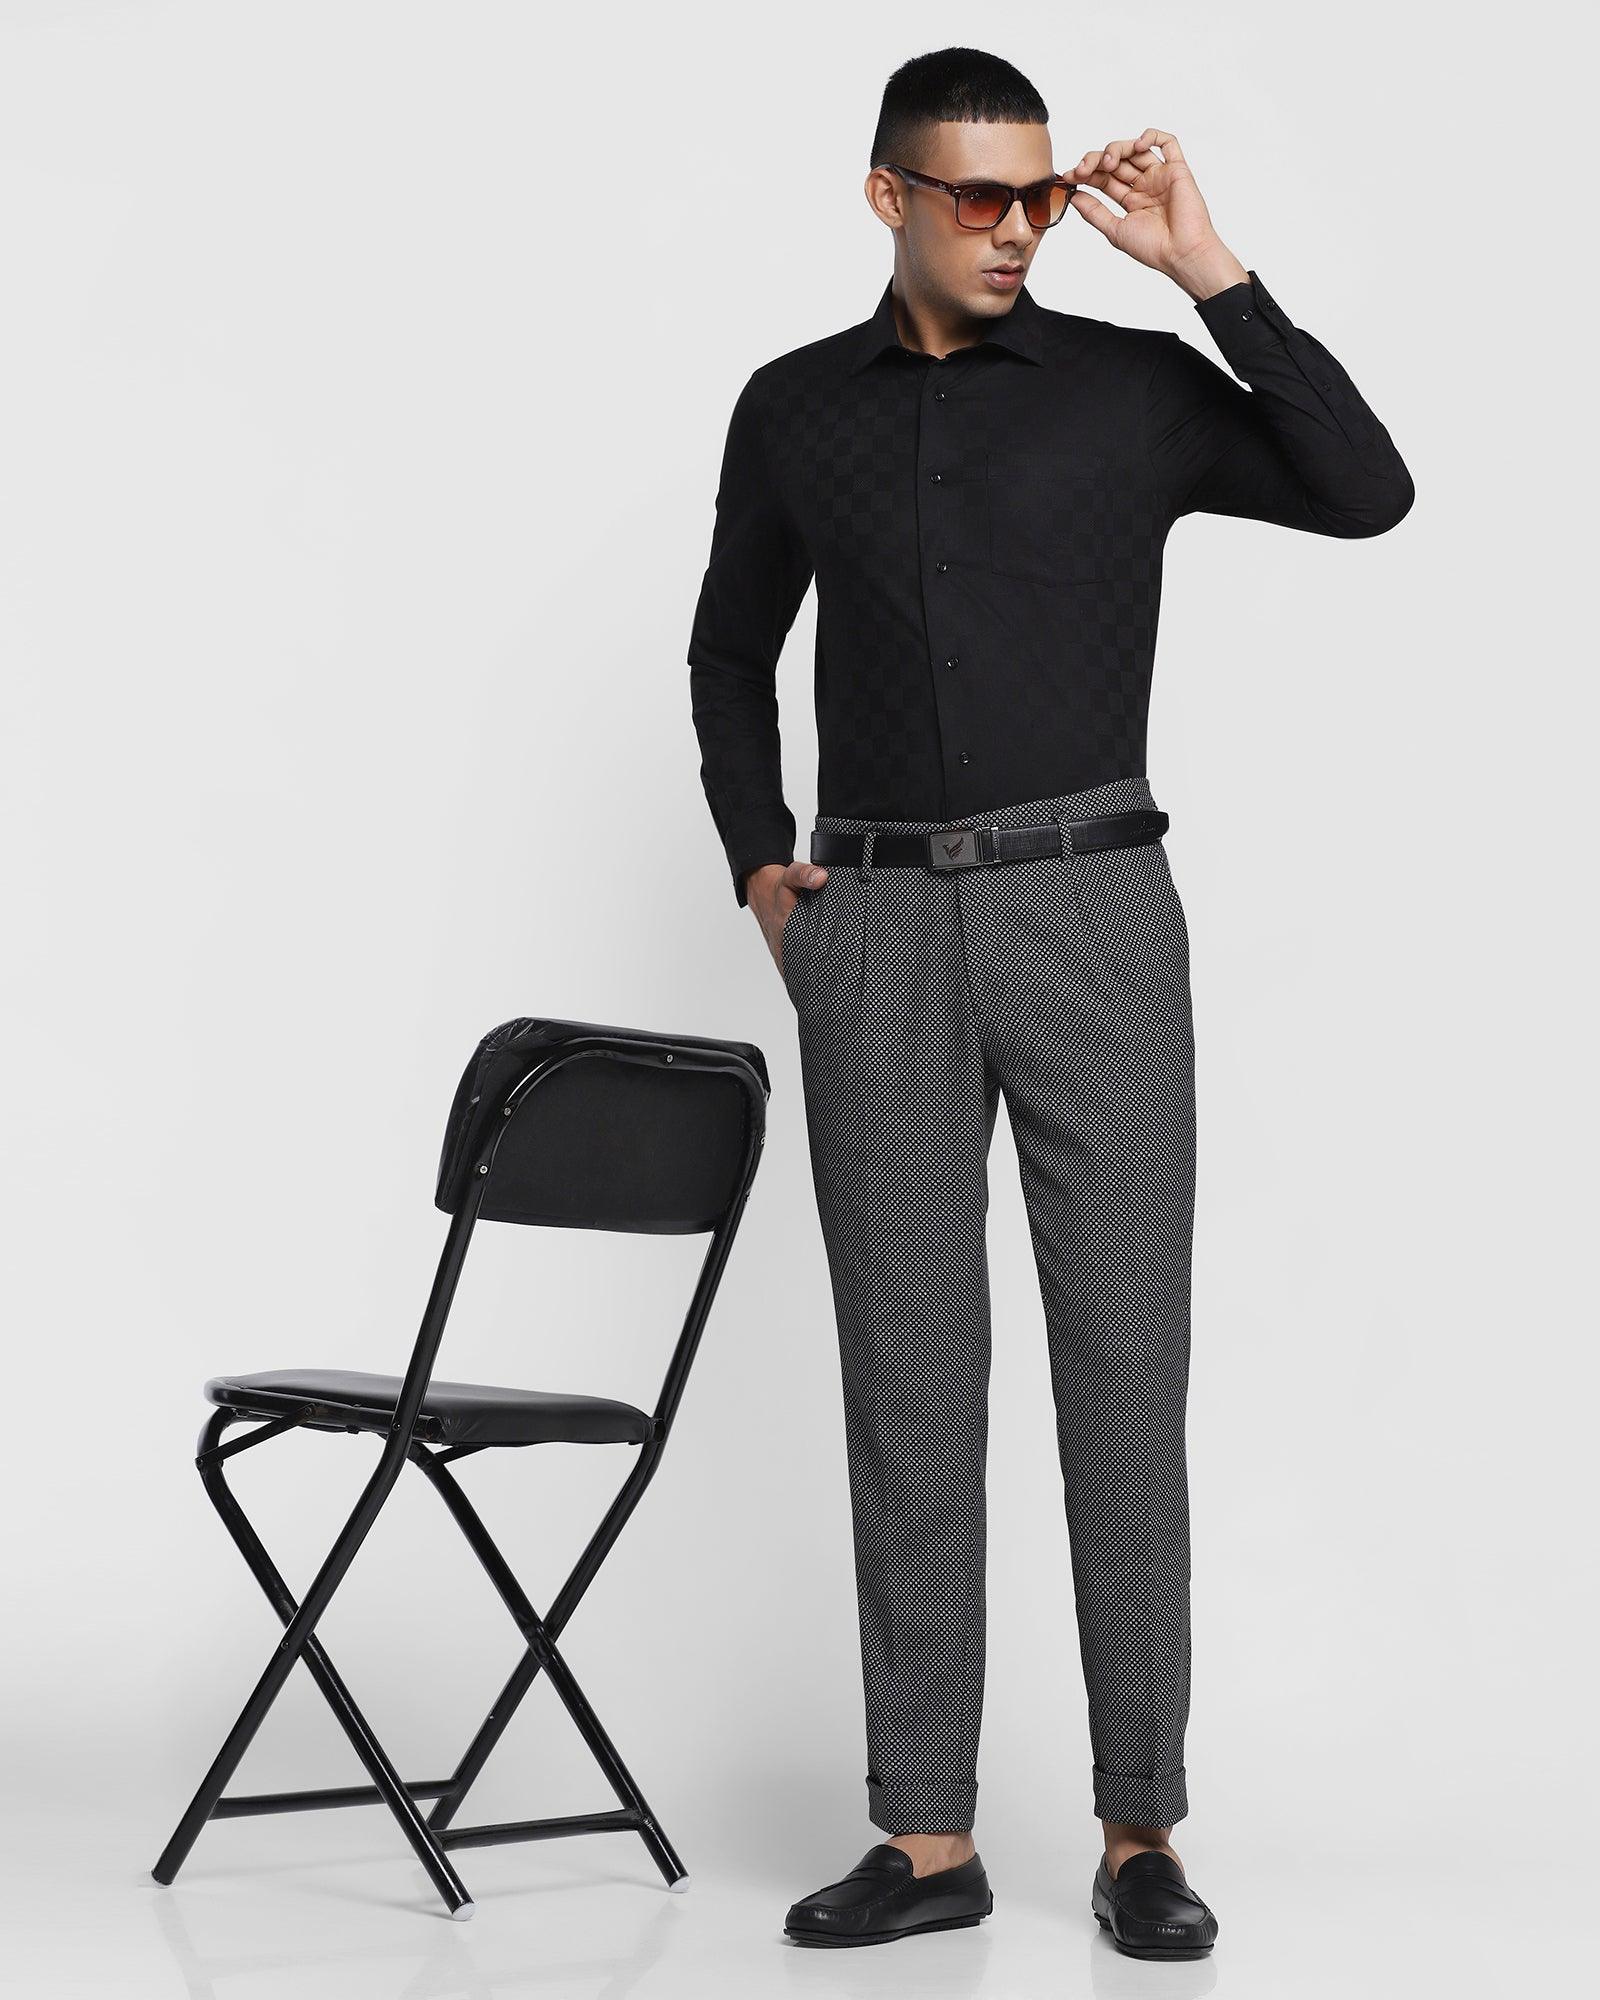 Monochrome Black Shirt and Trousers Outfit | Hockerty